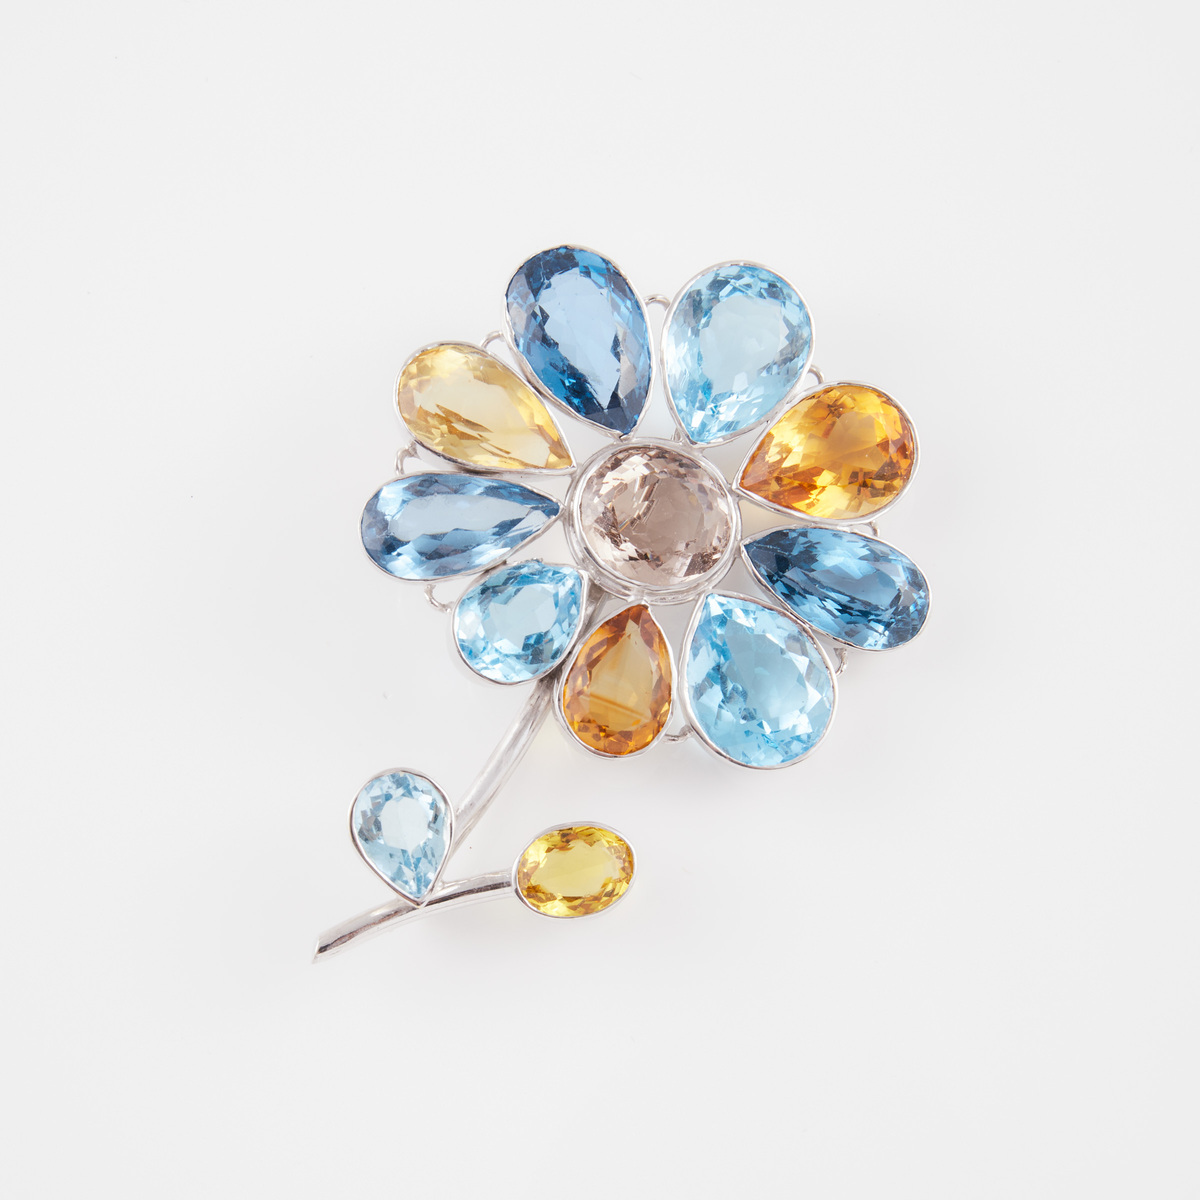 Large 14k White Gold Floral Brooch, bezel set with oval and pear cut blue topaz and citrine